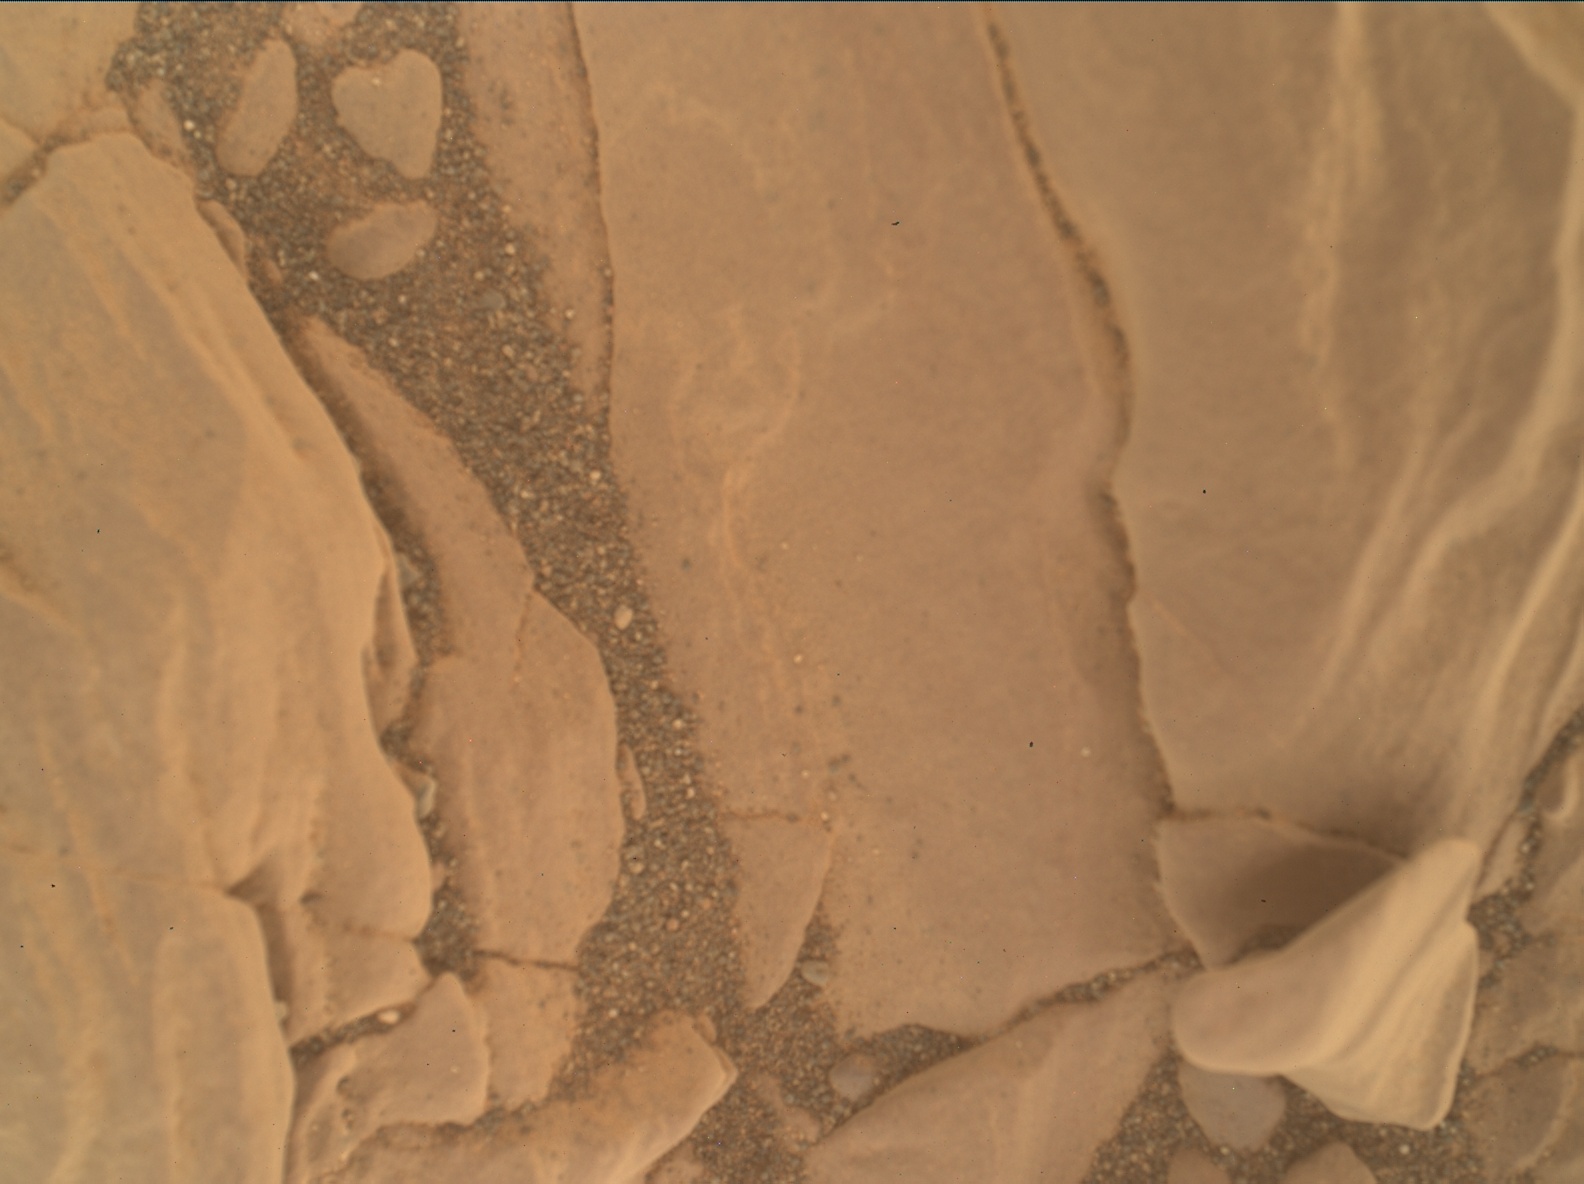 Nasa's Mars rover Curiosity acquired this image using its Mars Hand Lens Imager (MAHLI) on Sol 2938